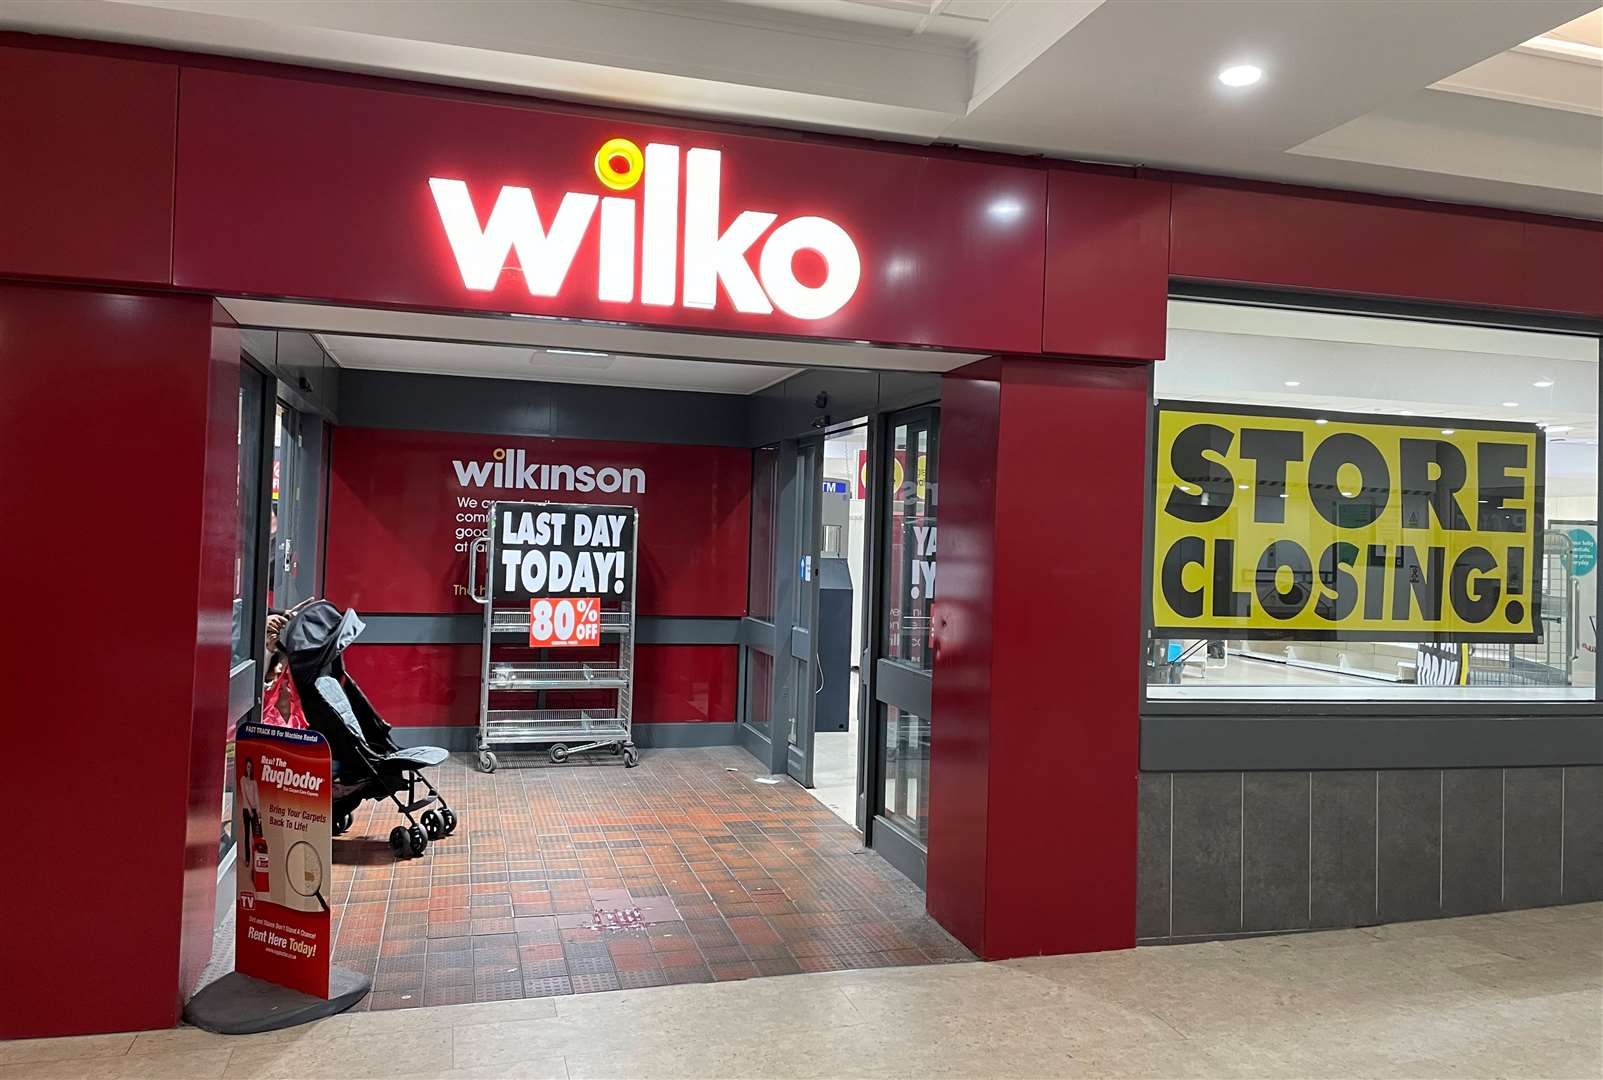 Wilko in the Thamesgate Shopping Centre in Gravesend town centre – one of the many which shut up shop for good